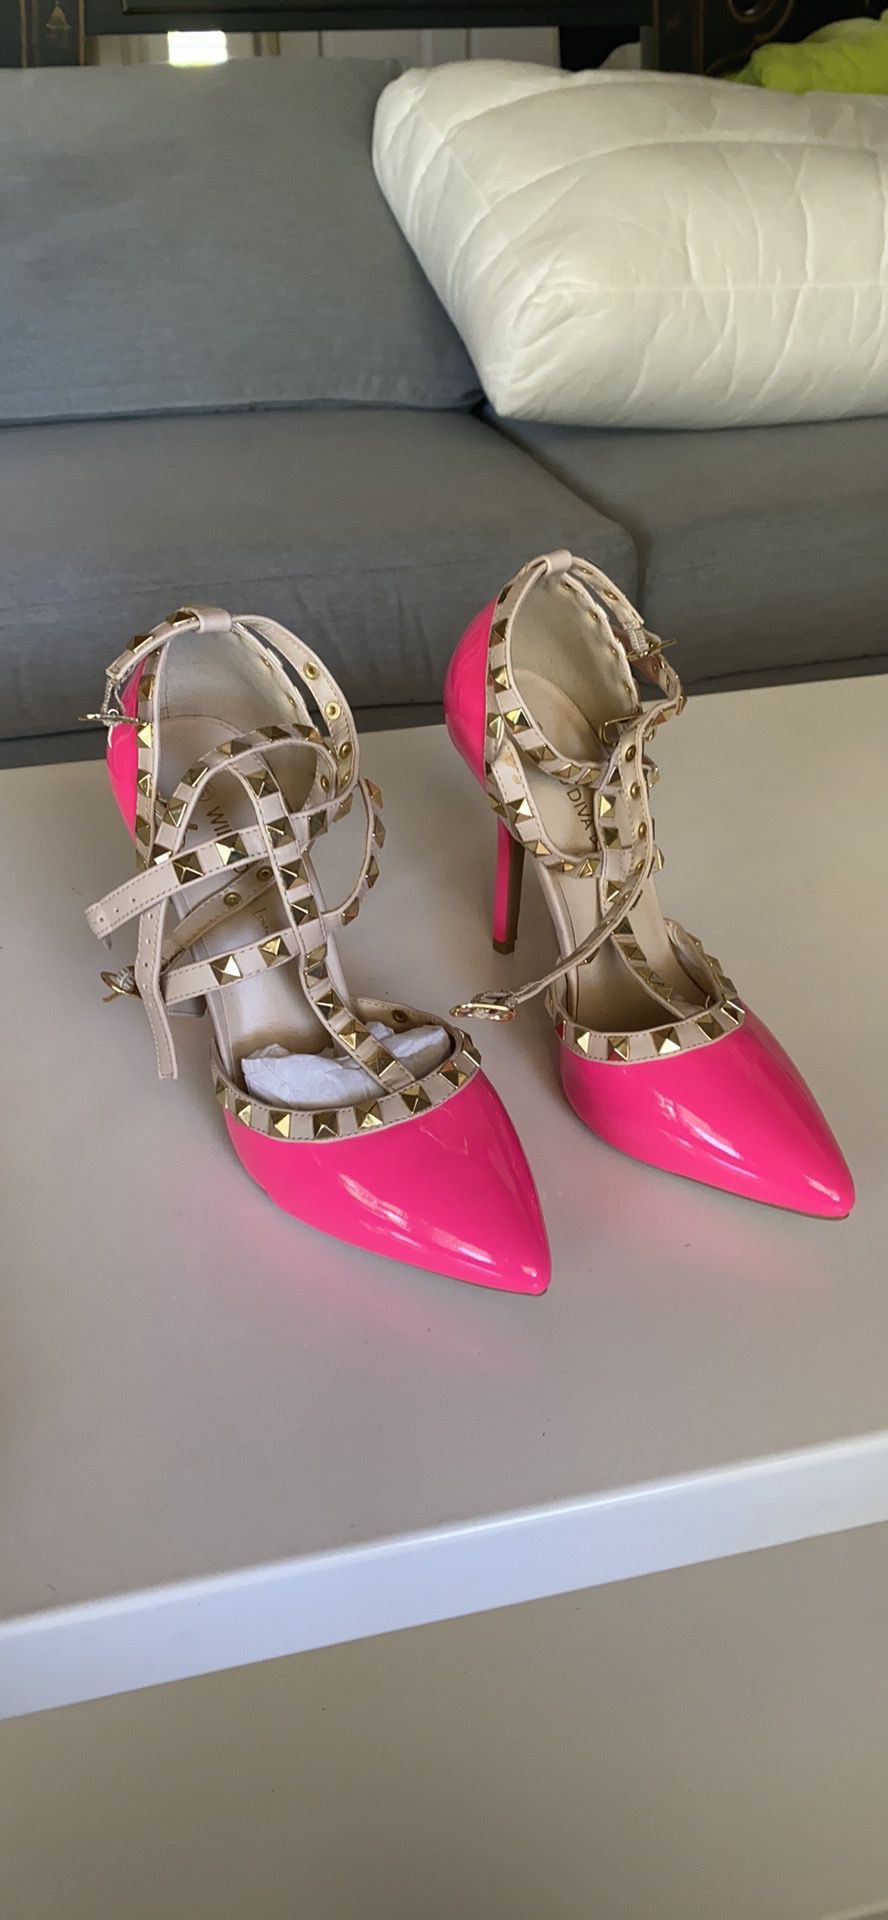 Hot pink heels w studded straps size 6.5